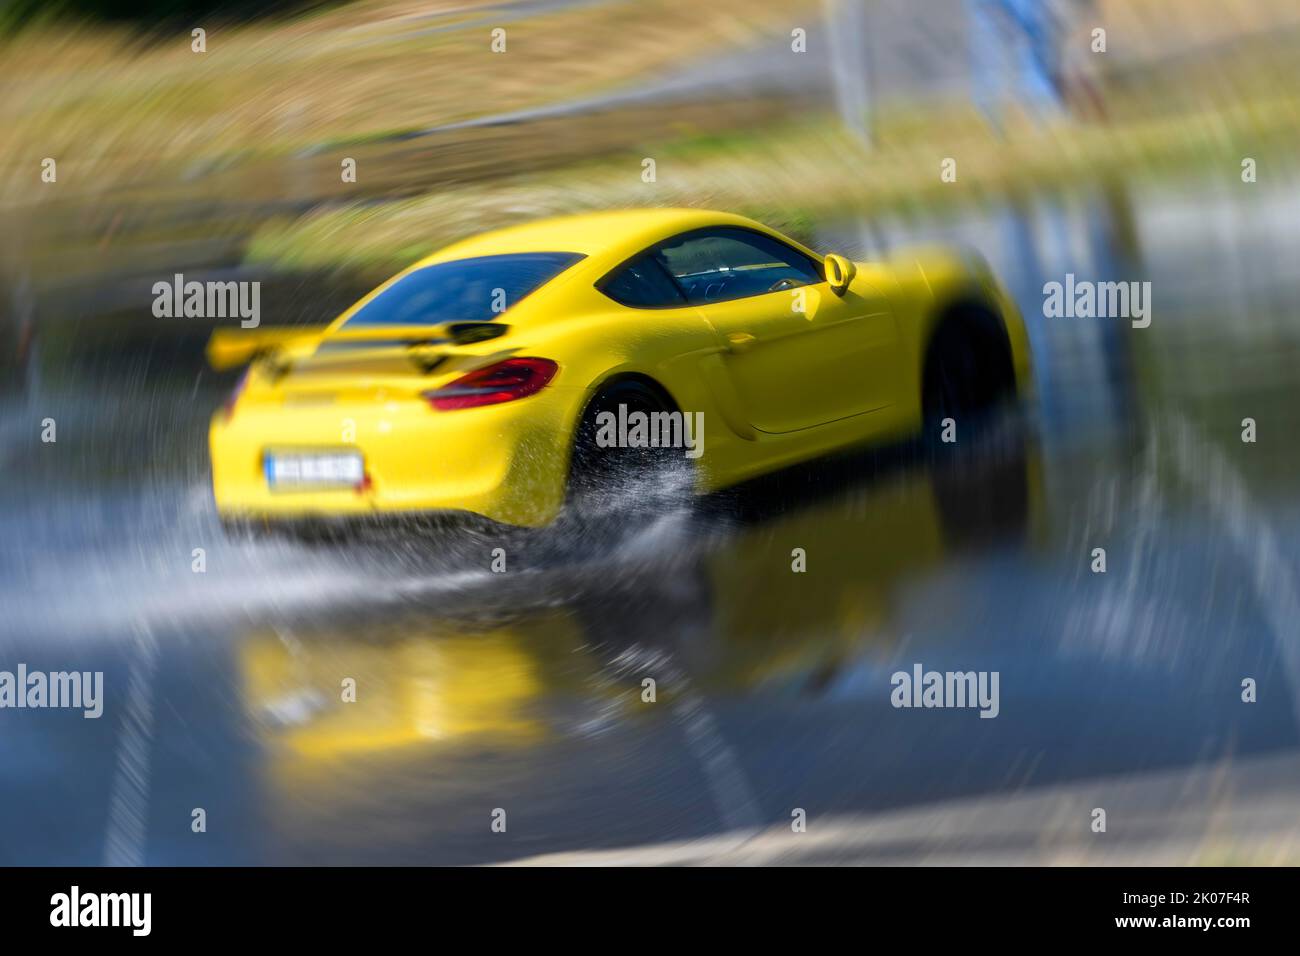 Sports car racing car Porsche Cayman GT4 on artificially rain wet road during driving safety training skids due to aquaplaning, in the foreground Stock Photo